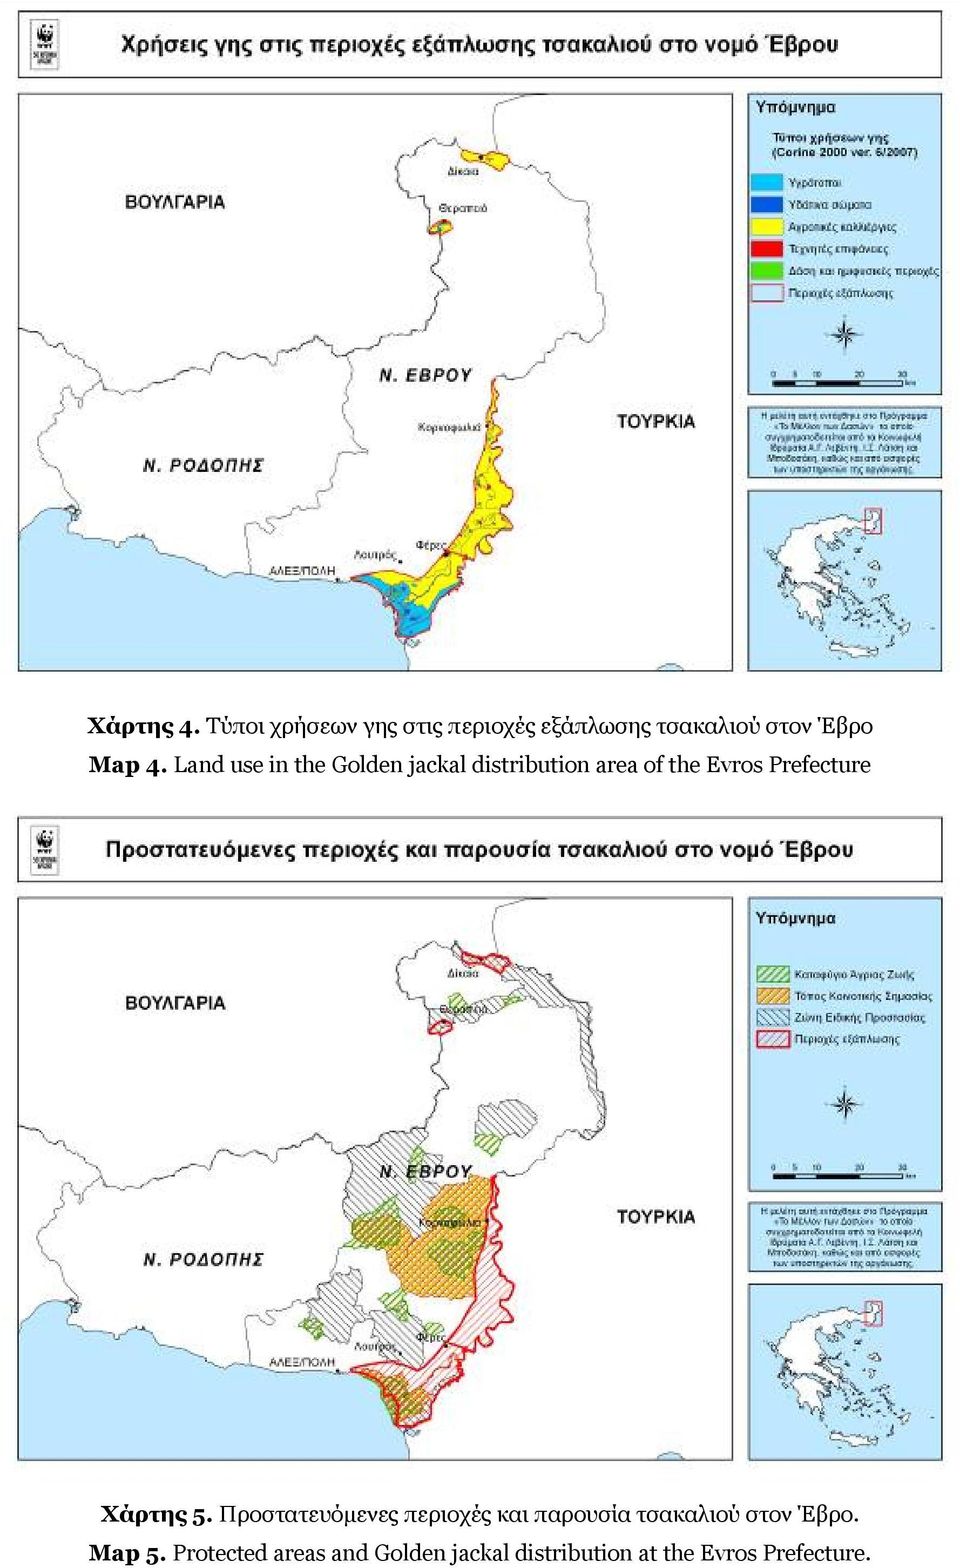 Land use in the Golden jackal distribution area of the Evros Prefecture